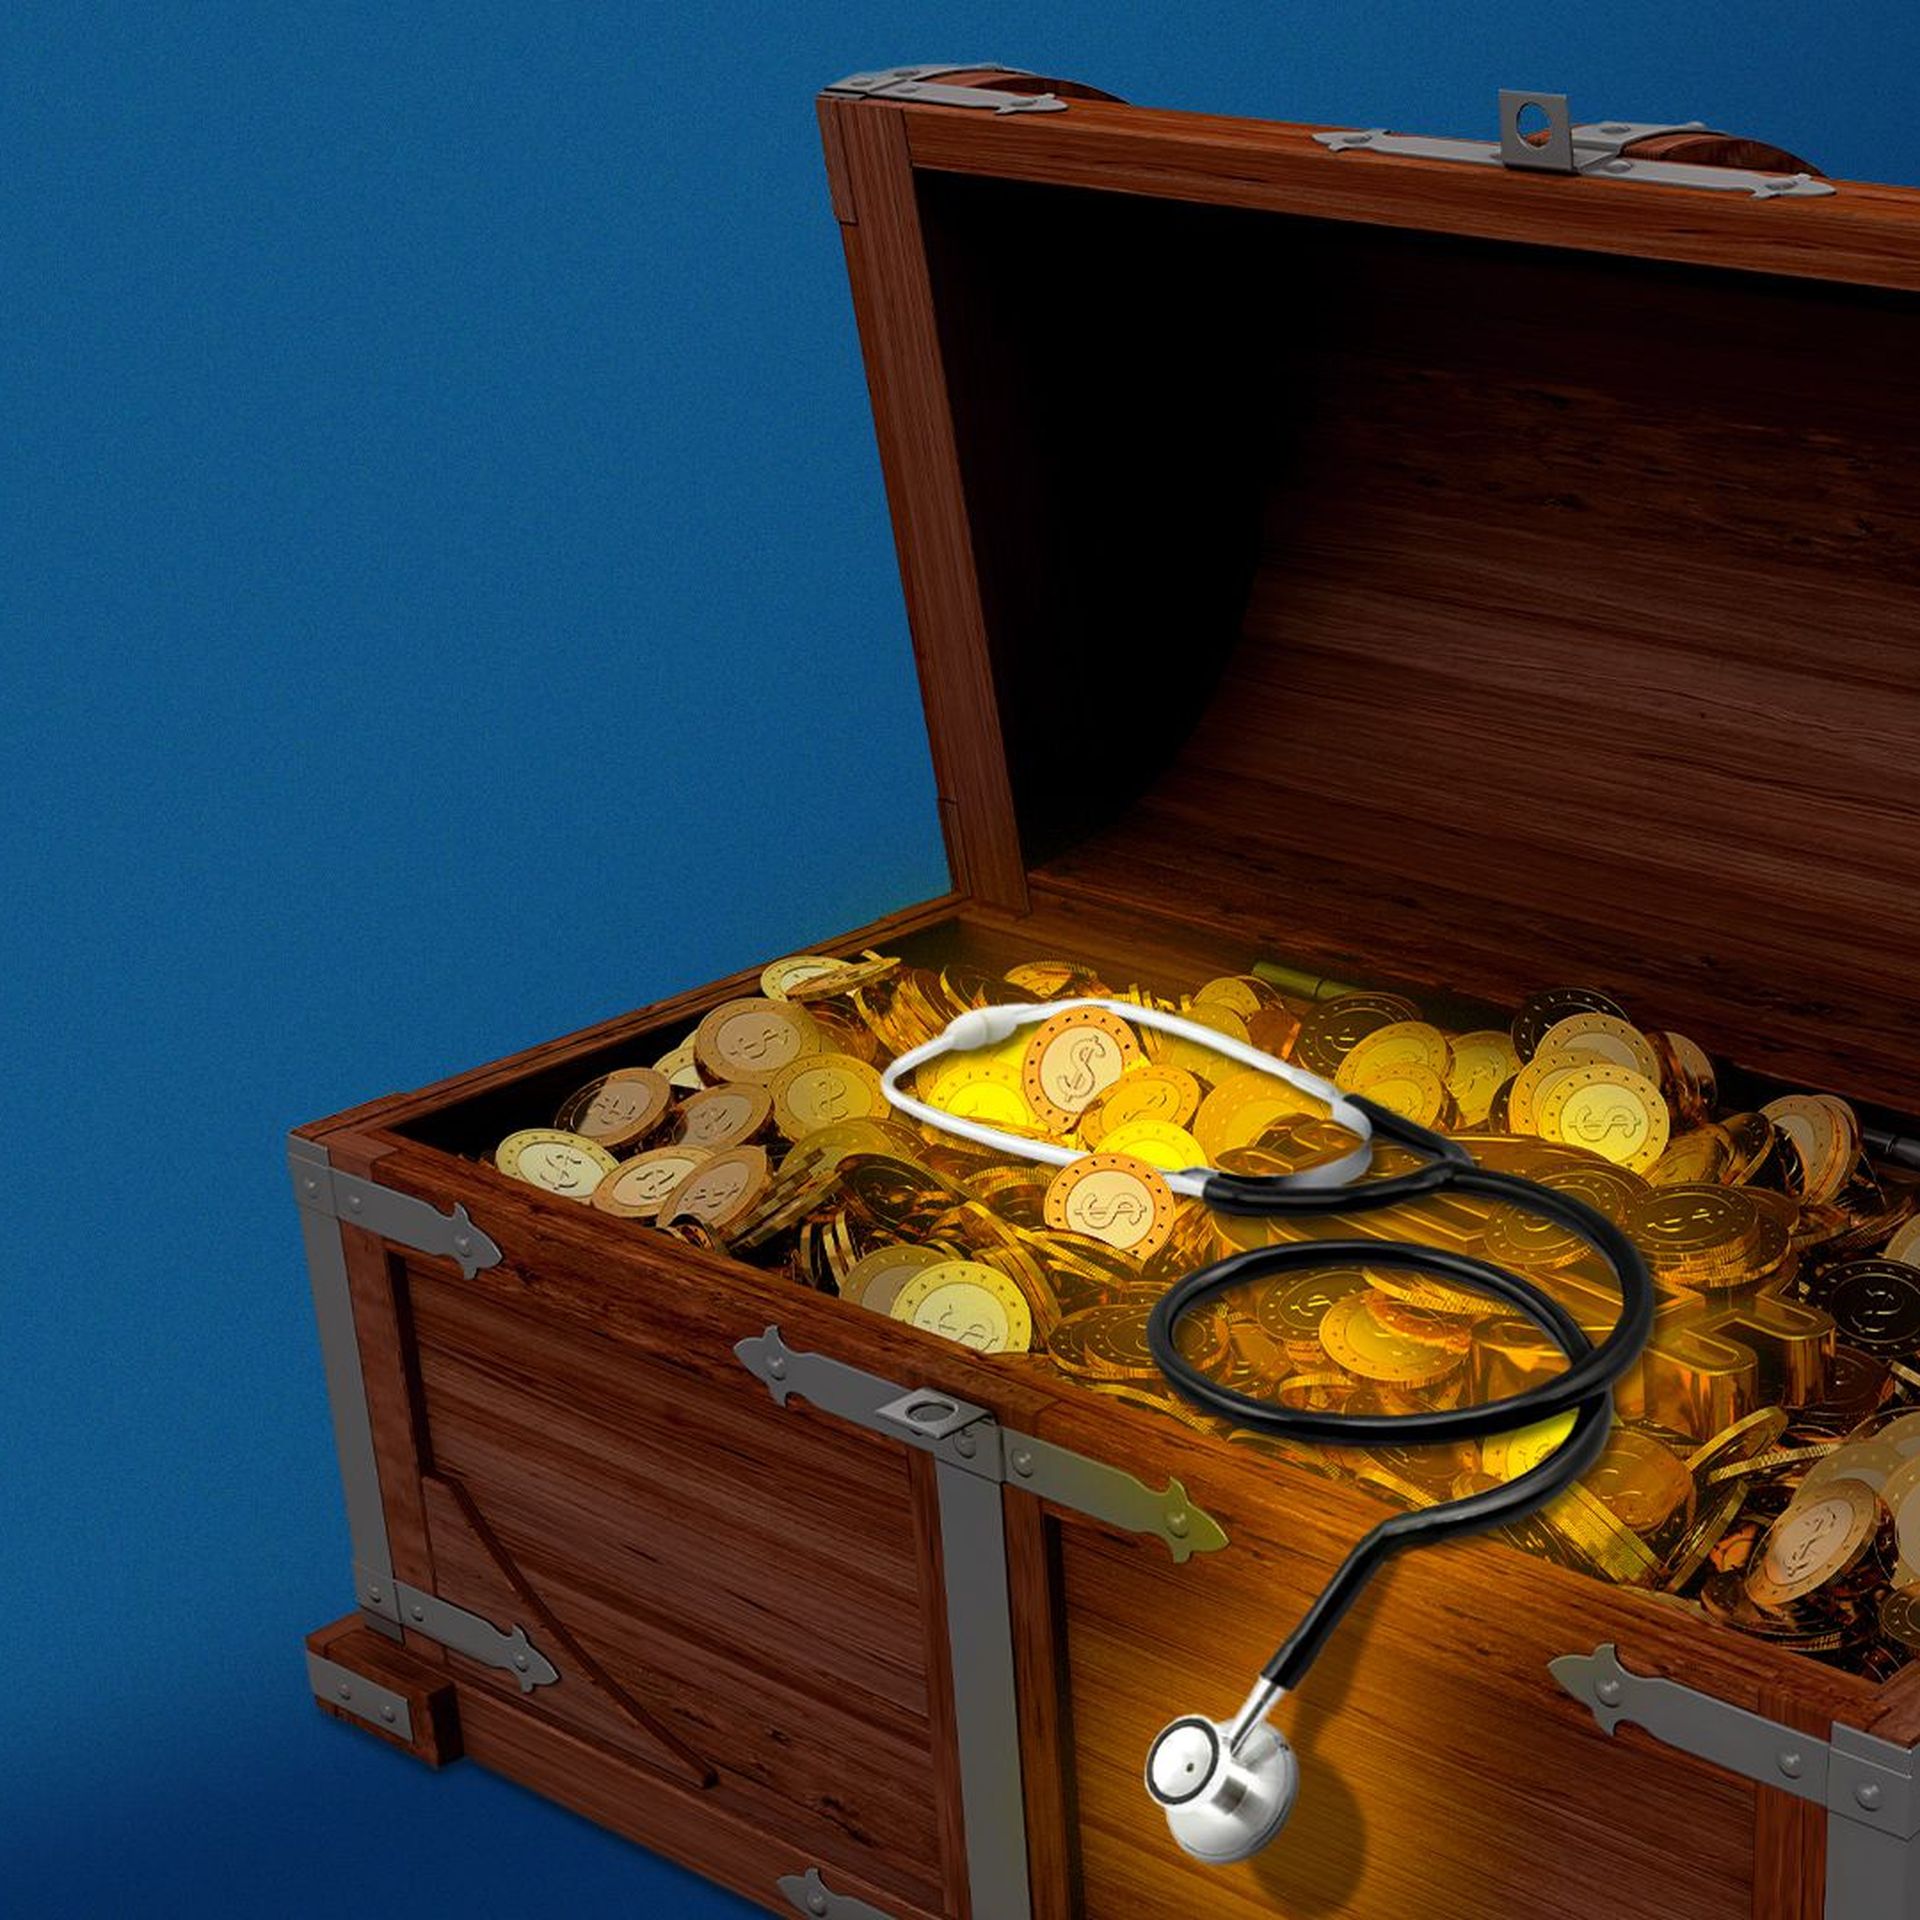 Illustration of a treasure chest full of coins and a stethoscope.